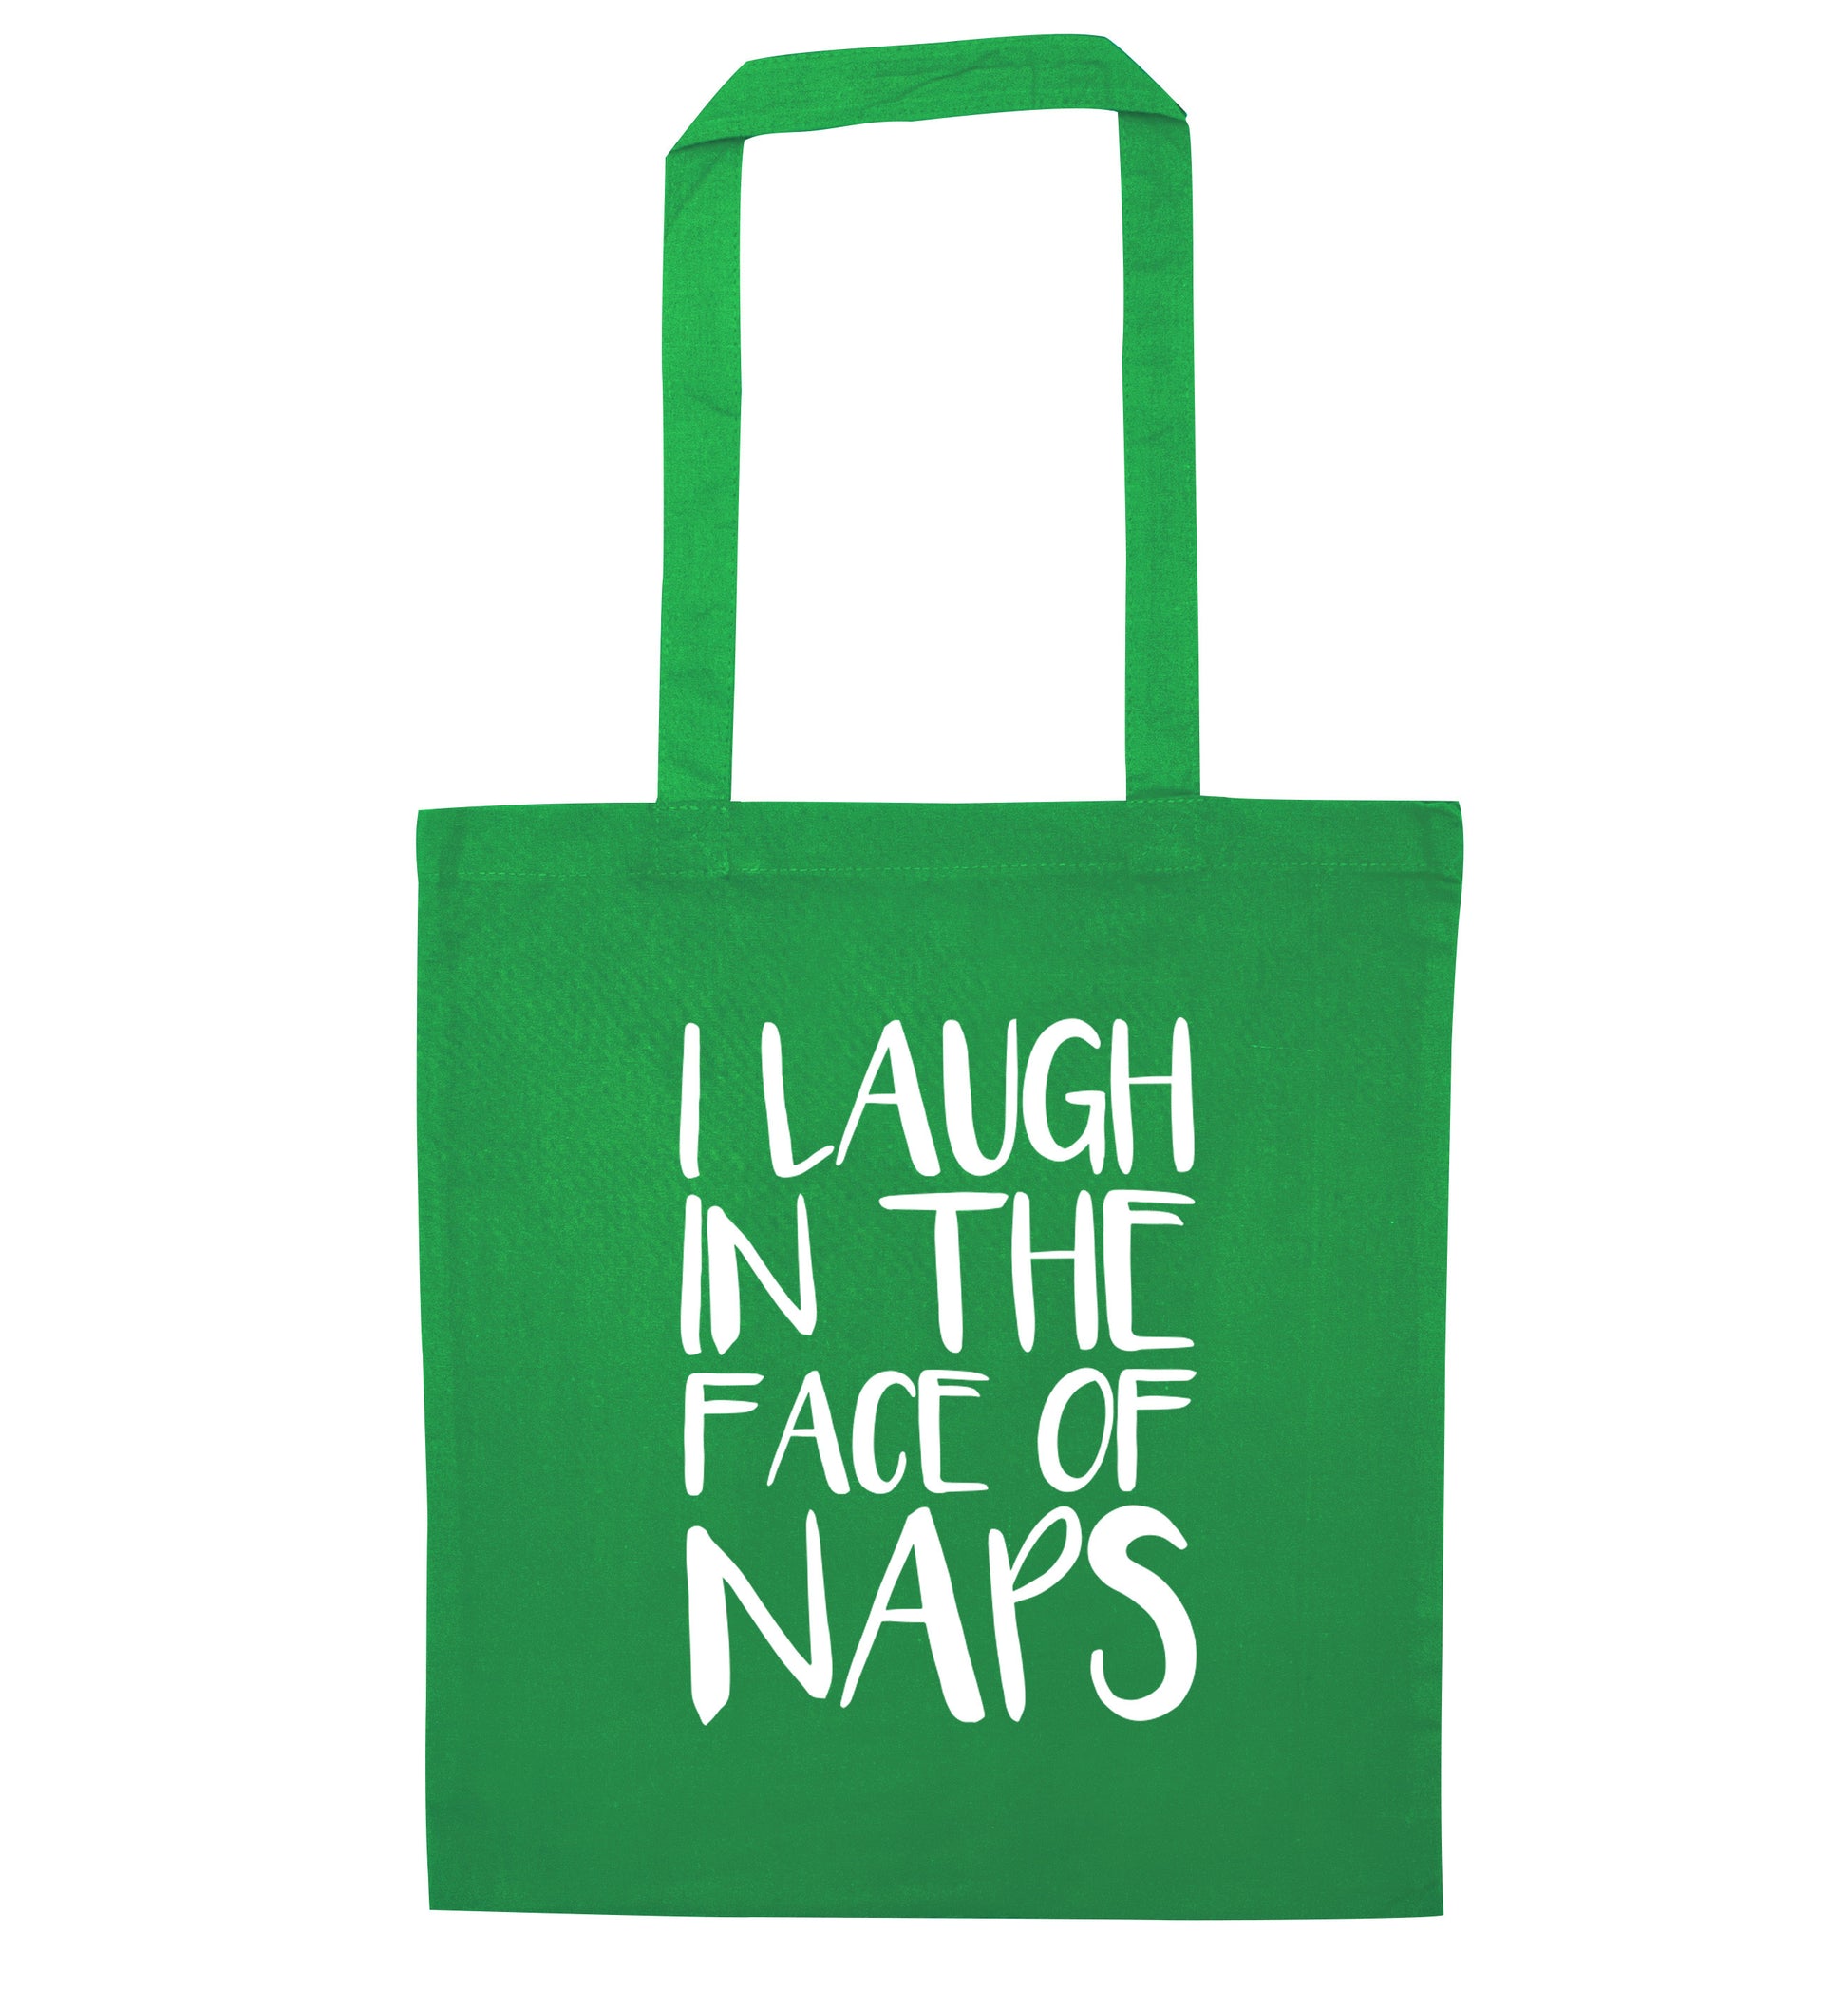 I laugh in the face of naps green tote bag